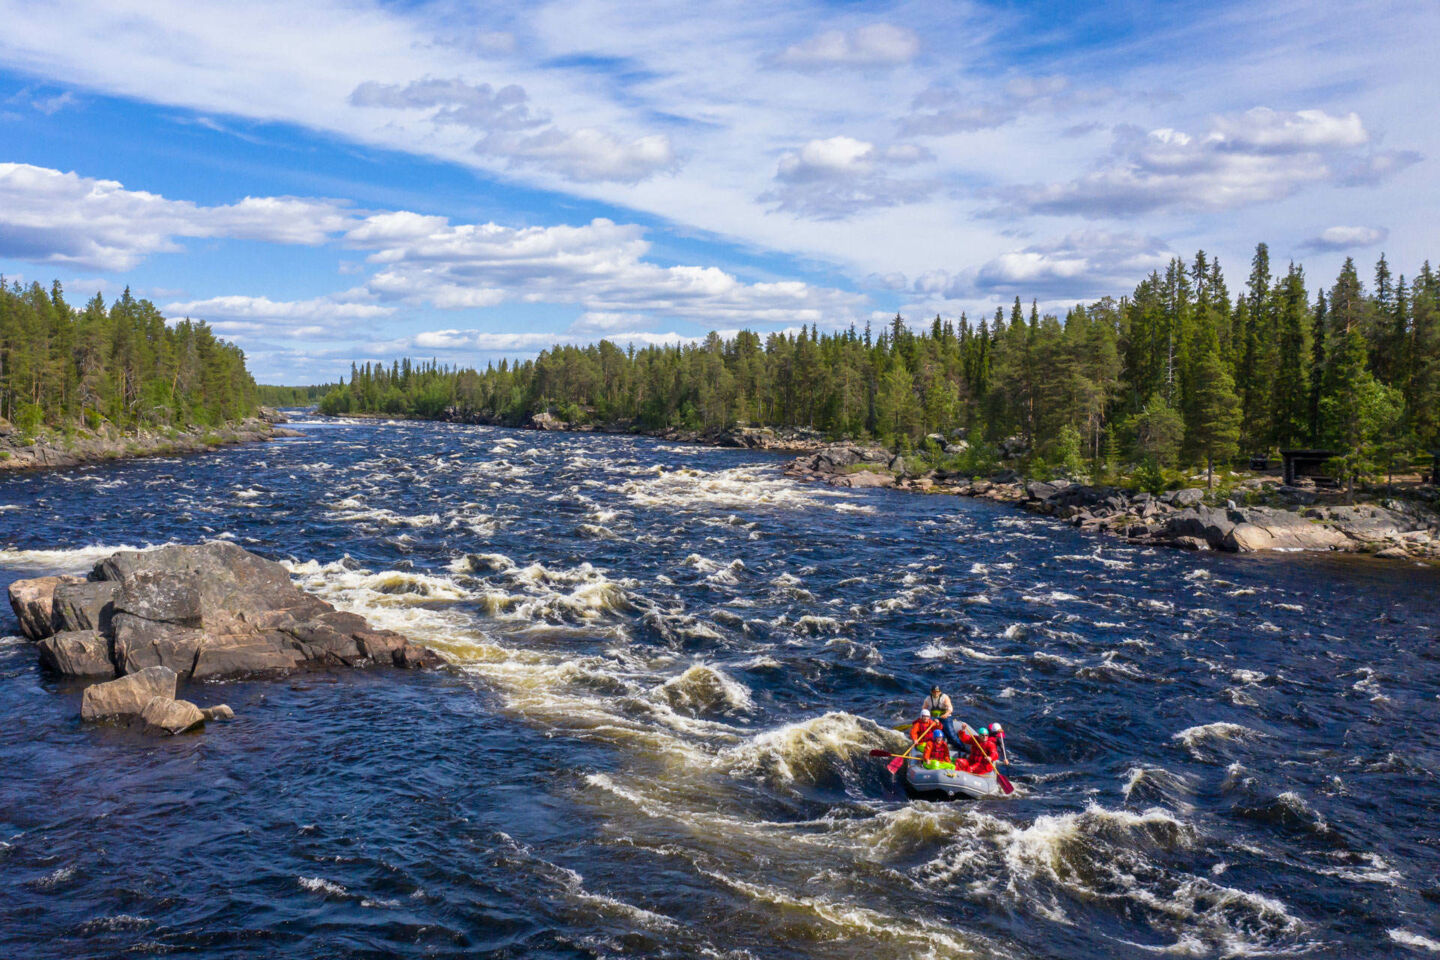 Rafting at the Aijakoski rapids in Muonio, a Finnish Lapland filming location